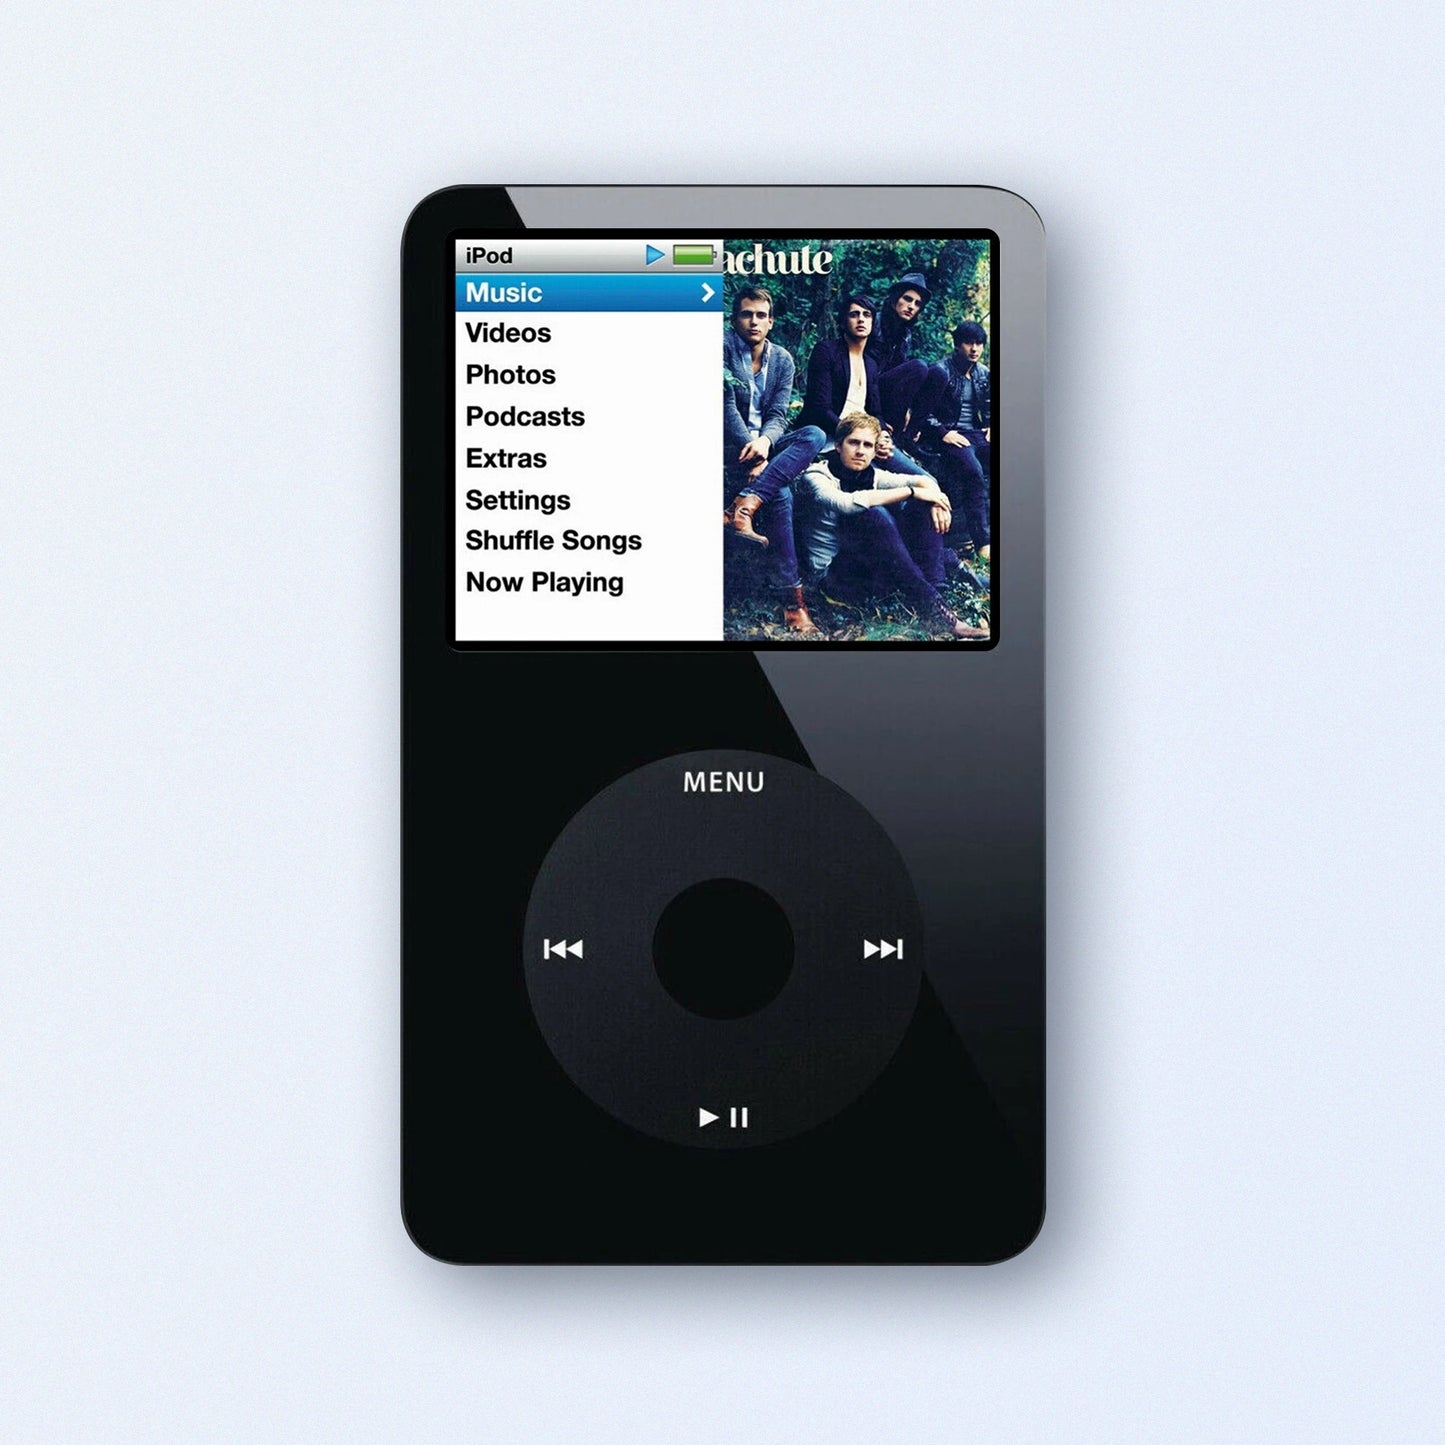 Bluetooth iPod Classic Black 5th Generation upgraded with SDXC Card